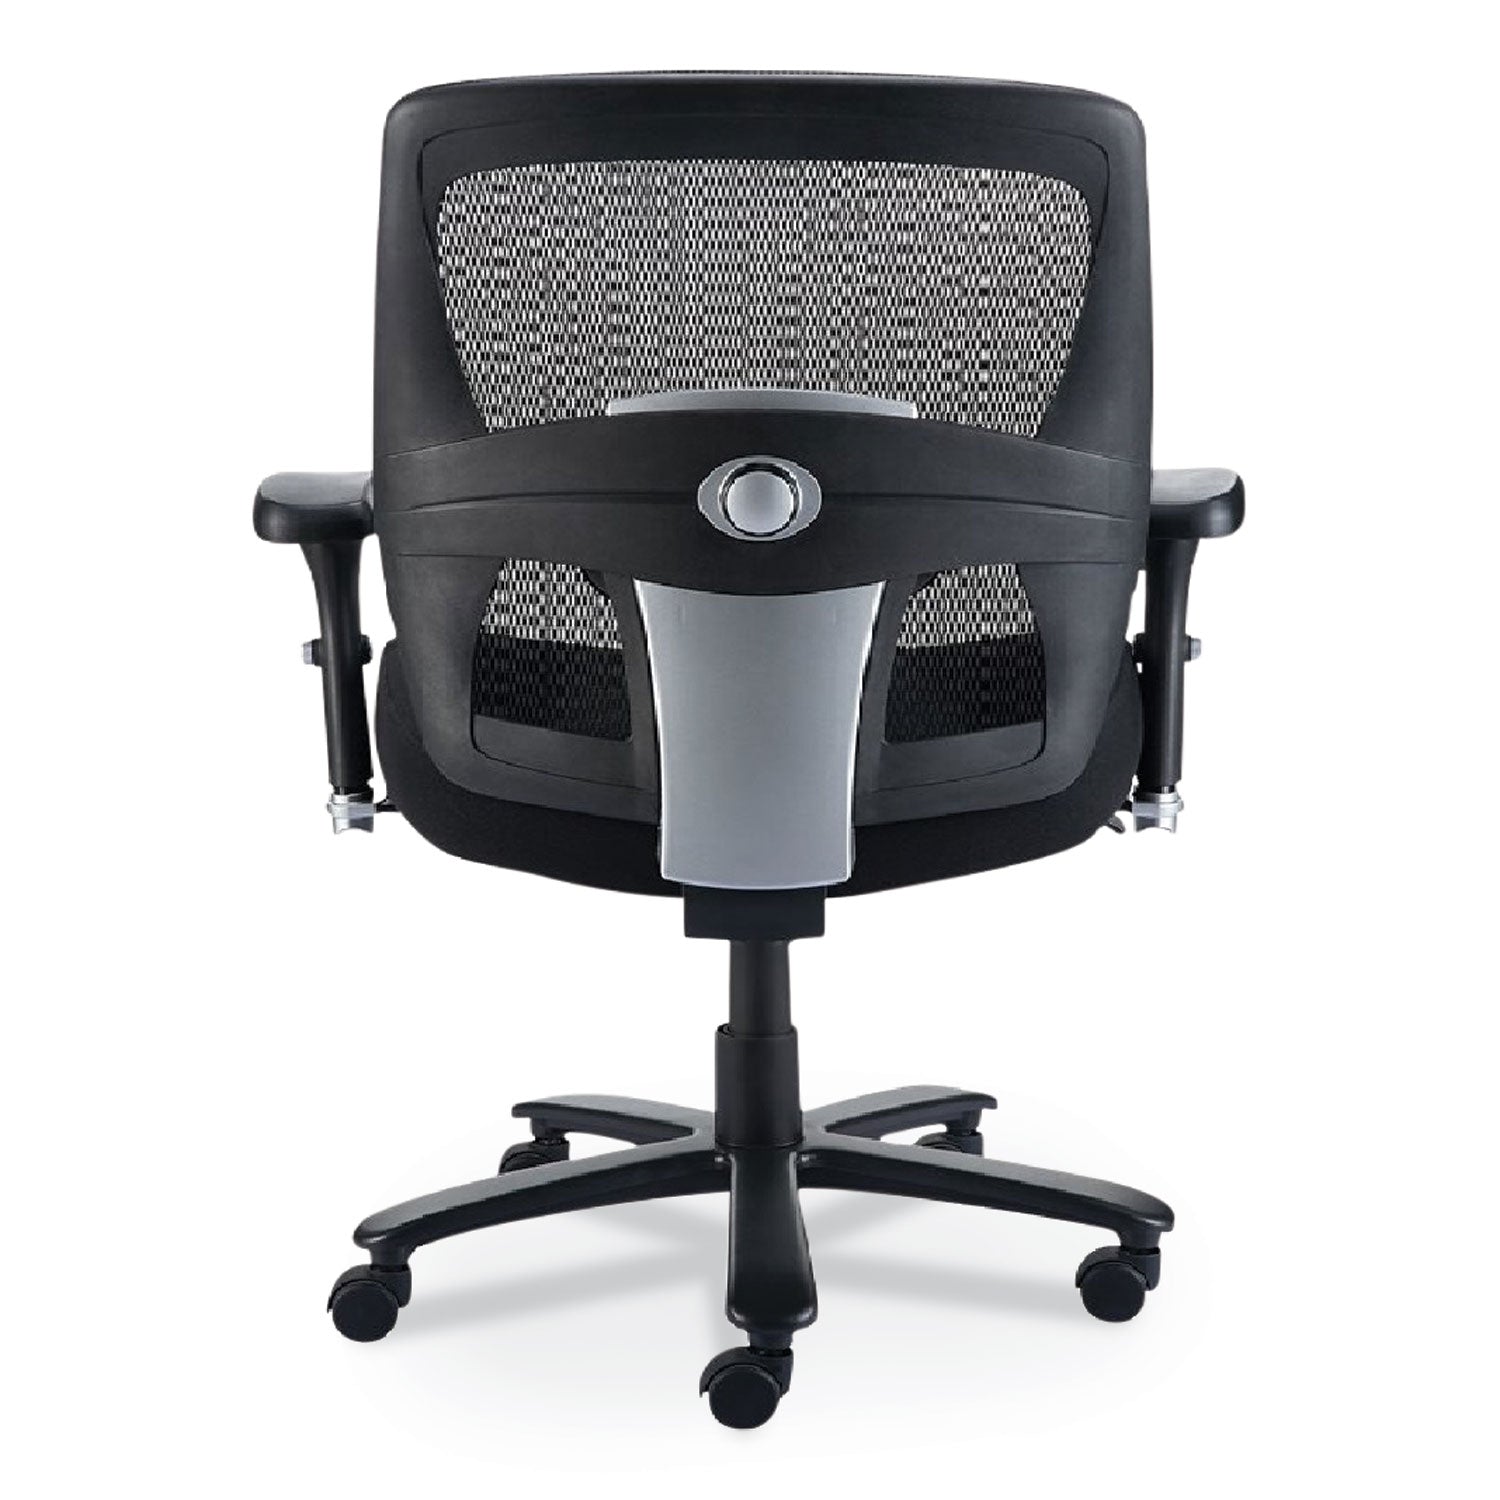 Alera Faseny Series Big and Tall Manager Chair, Supports Up to 400 lbs, 17.48" to 21.73" Seat Height, Black Seat/Back/Base - 4